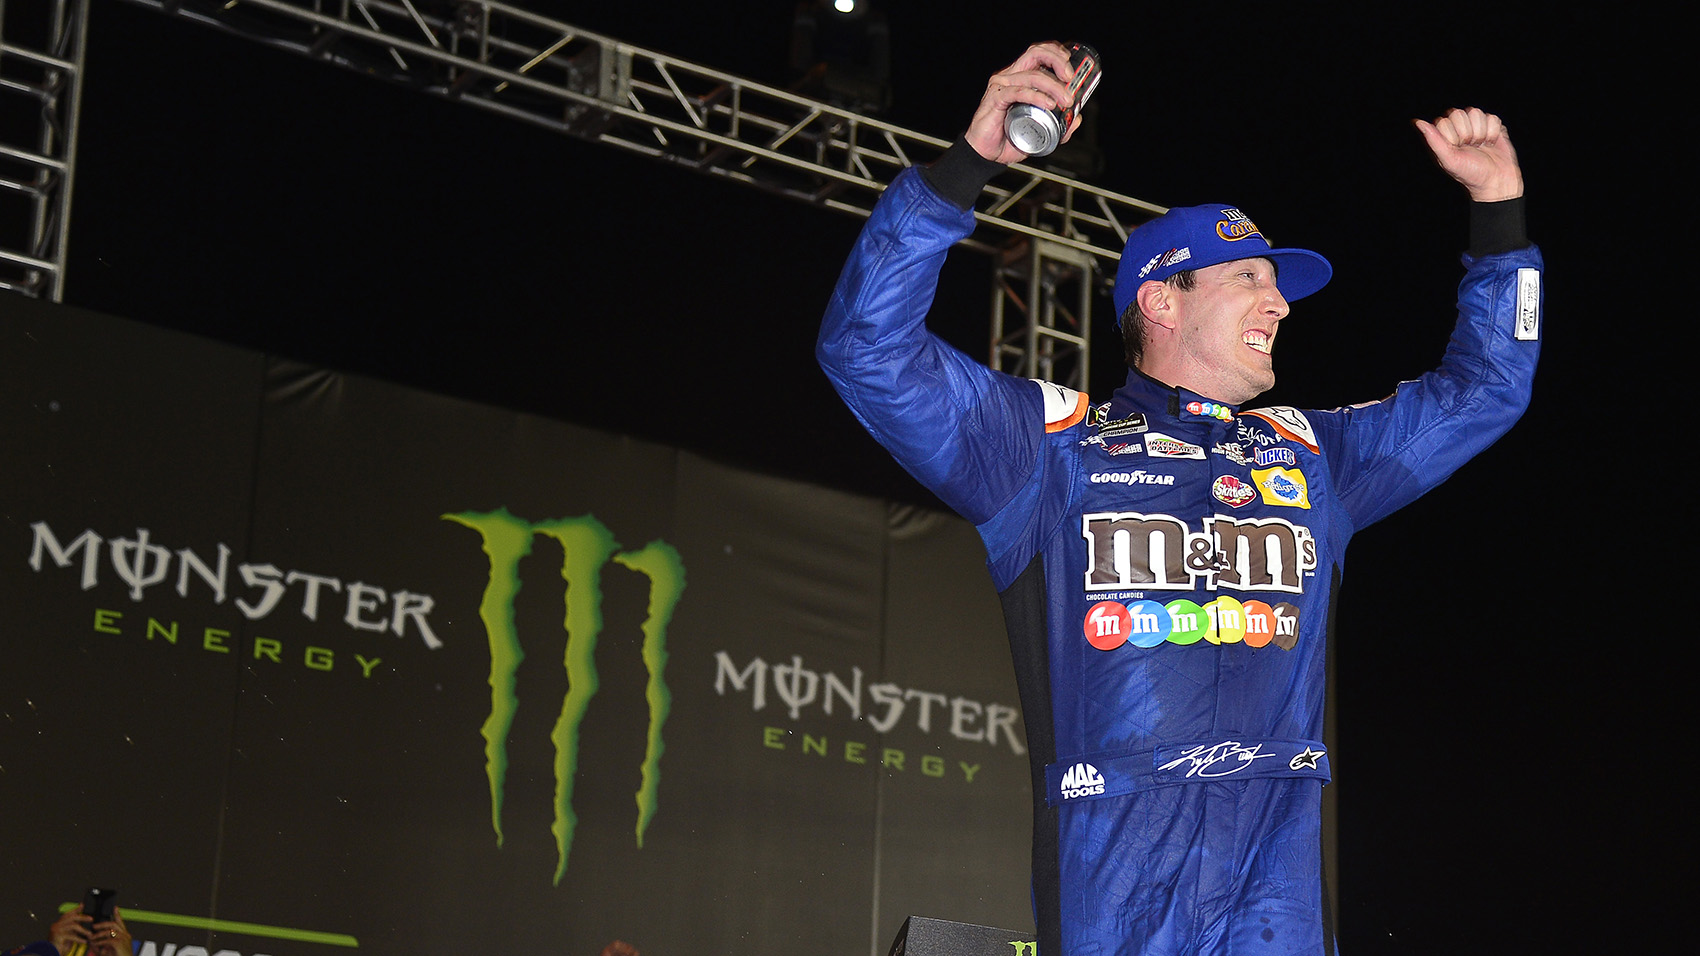 Social media reaction to Kyle Busch's Monster Energy All-Star win